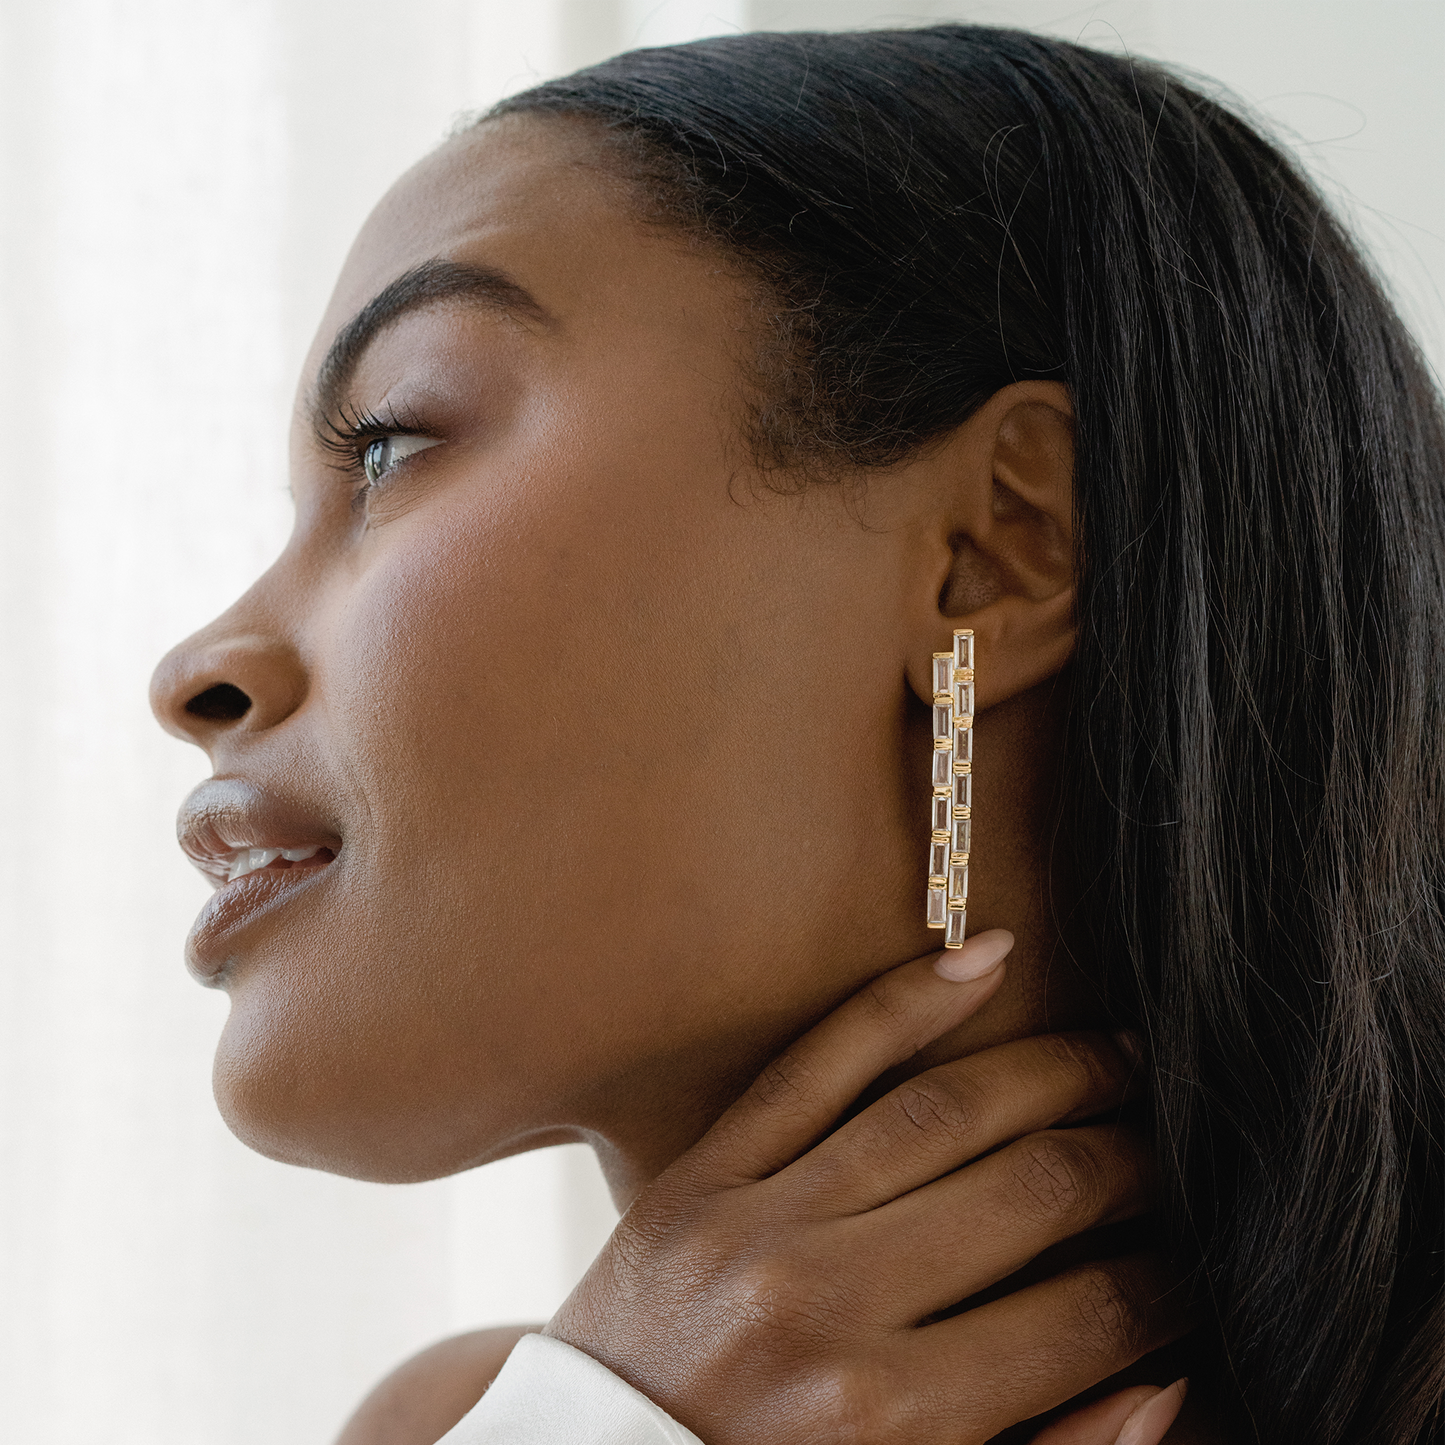 Alana Statement Earrings: Gold plate